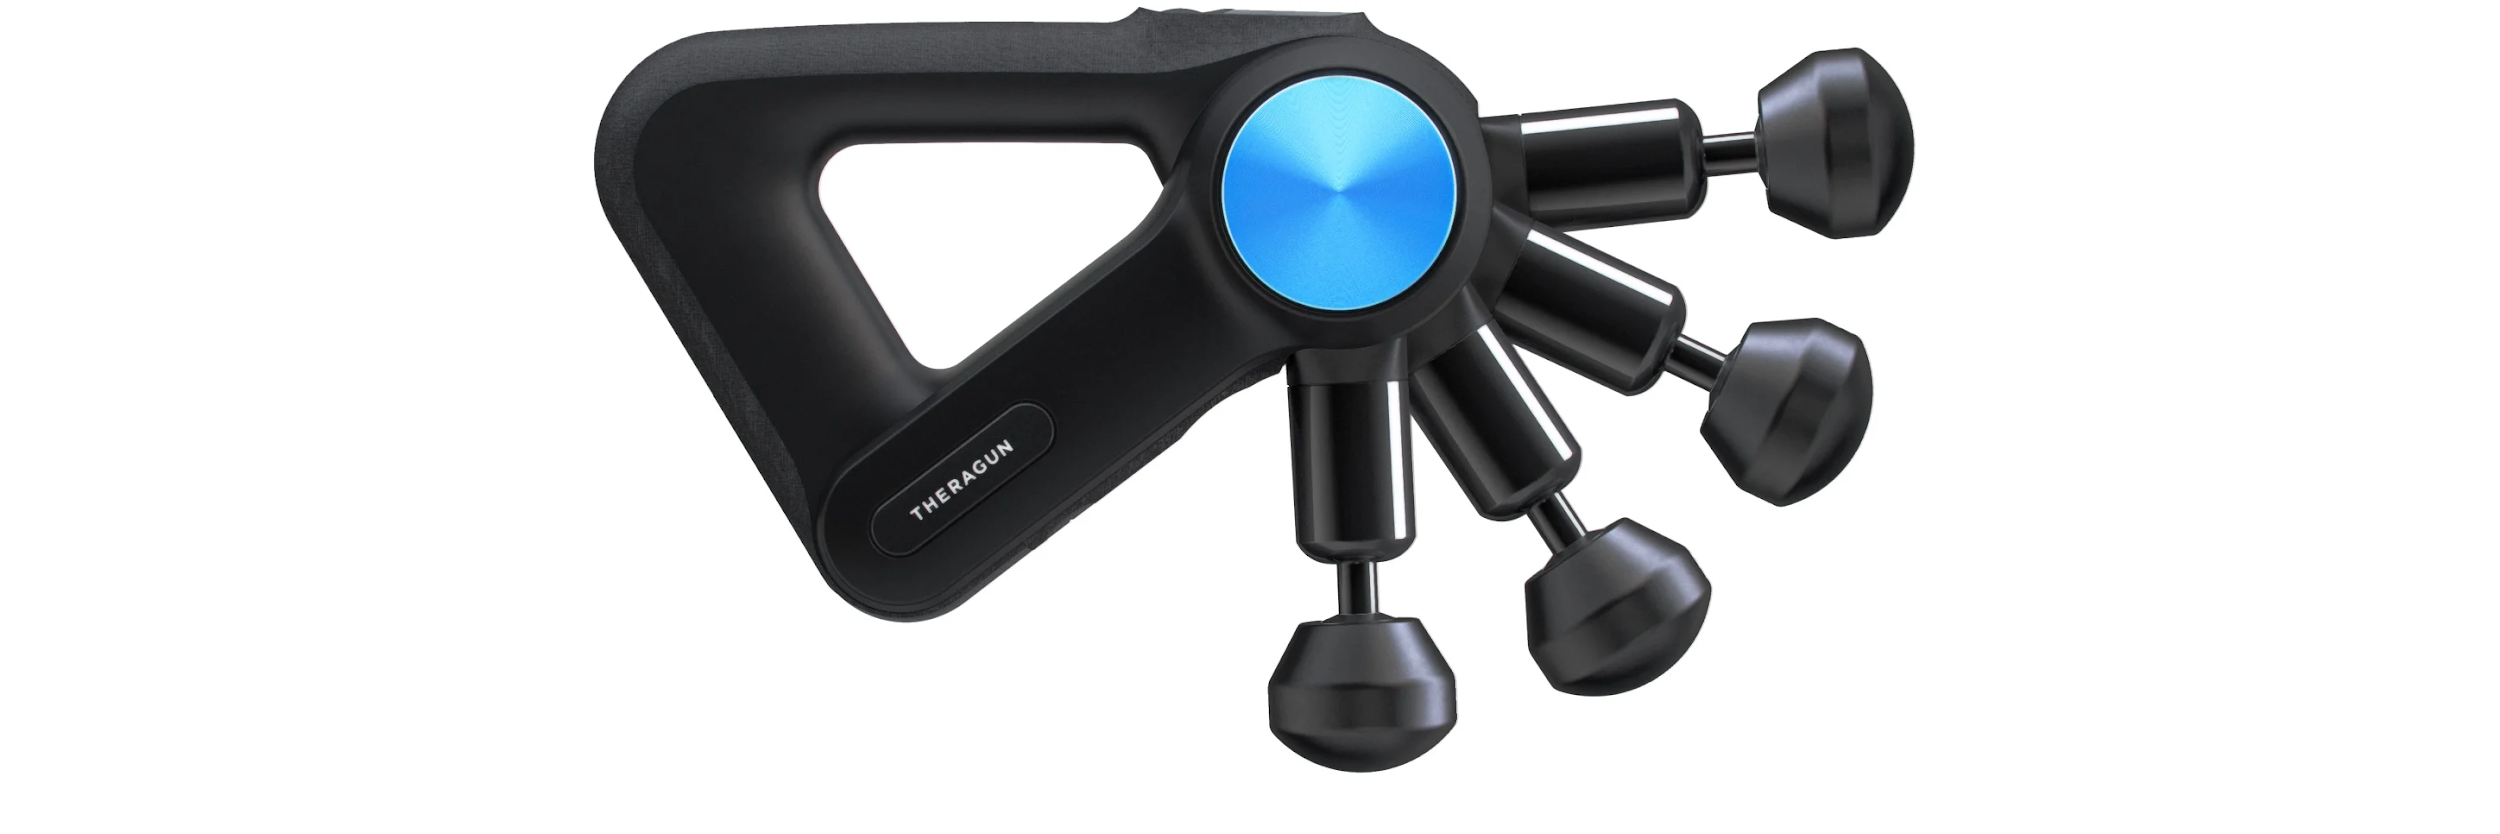 Best High-End for Professional Use is Theragun Elite/ G3 Pro, affordable massage gun, Best Massage Gun Review Singapore, Which massage gun is best in Singapore?, Are massage guns worth it?, Where to buy massage gun Singapore, Is a massage gun really worth it?,Which massage gun is best?,How much should I spend on a massage gun?, 5 massage guns you should invest in for effective muscle relief, Is the Theragun really worth it?,Can Theragun be harmful?,Is there anything better than Theragun?,Is it OK to use Theragun everyday?,